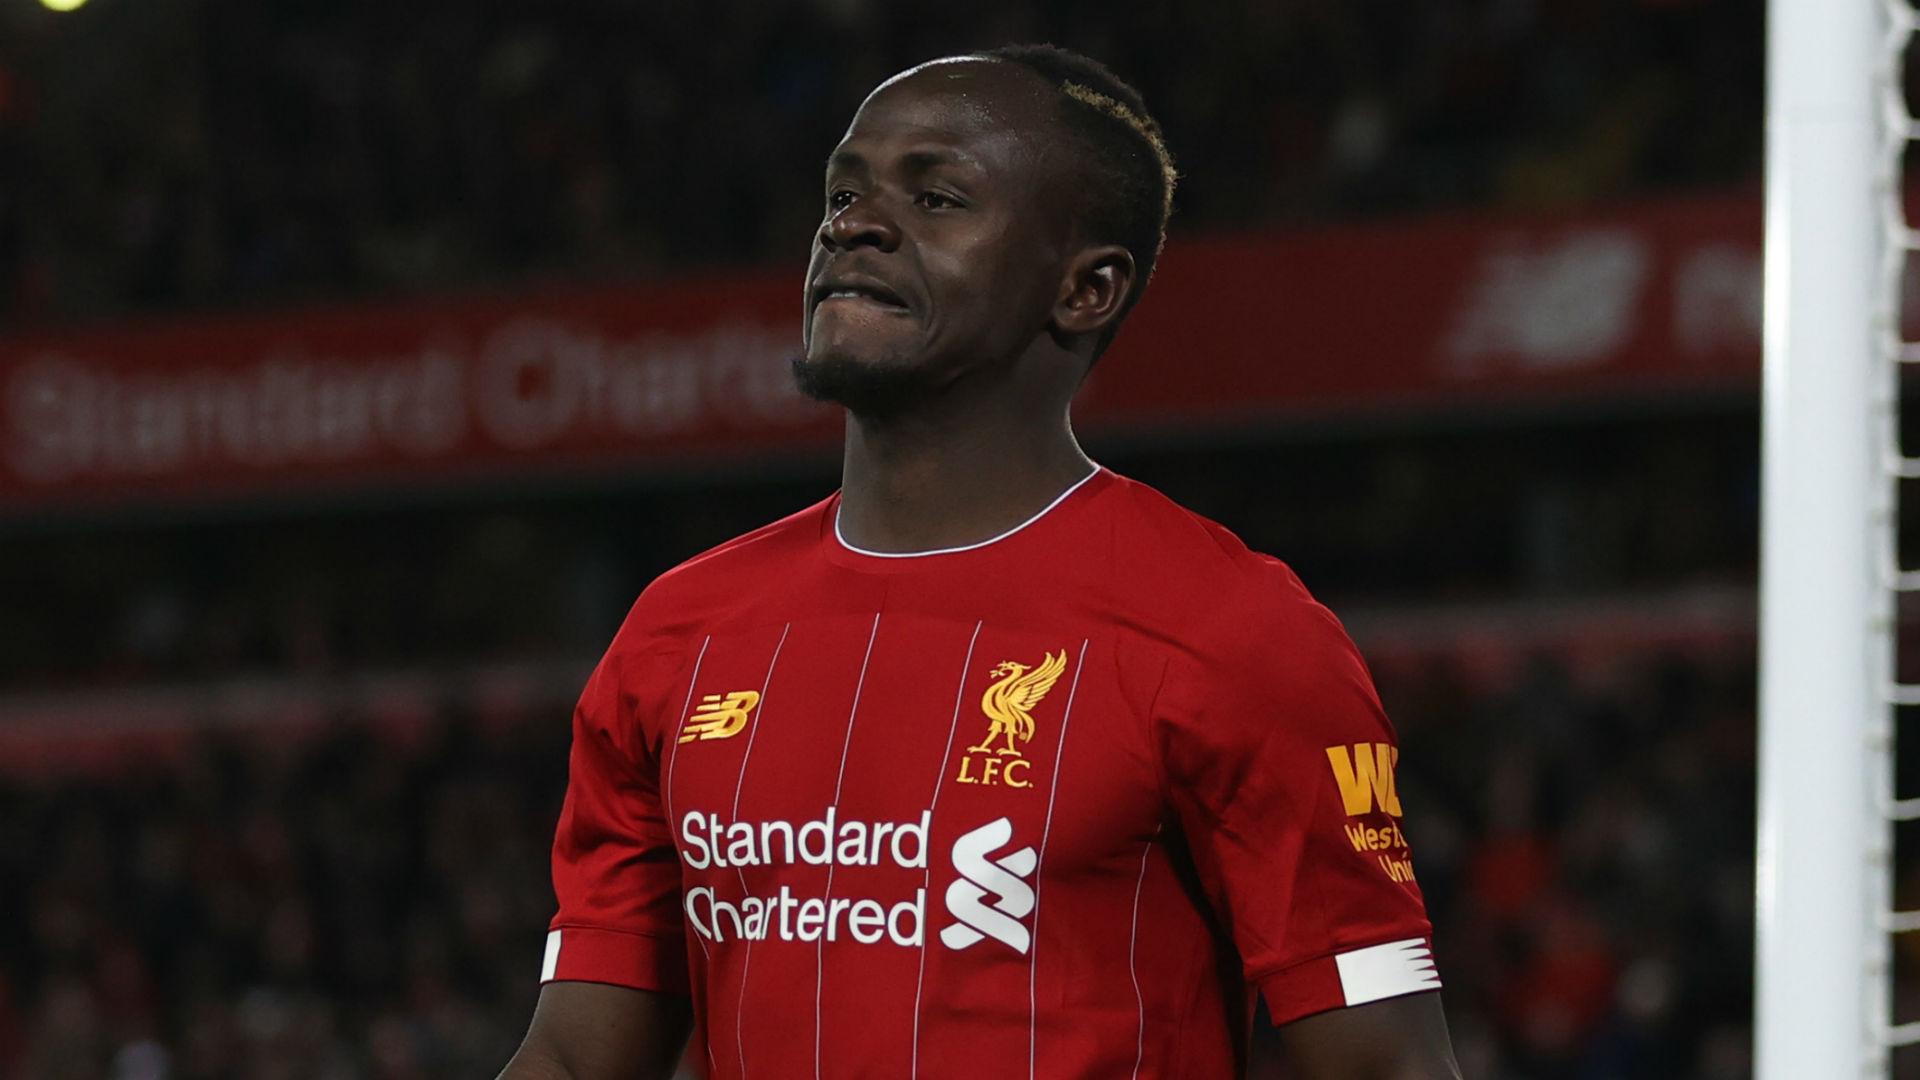 Just two more wins would guarantee Liverpool the Premier League title, but Sadio Mane would understand if the season was scrapped.